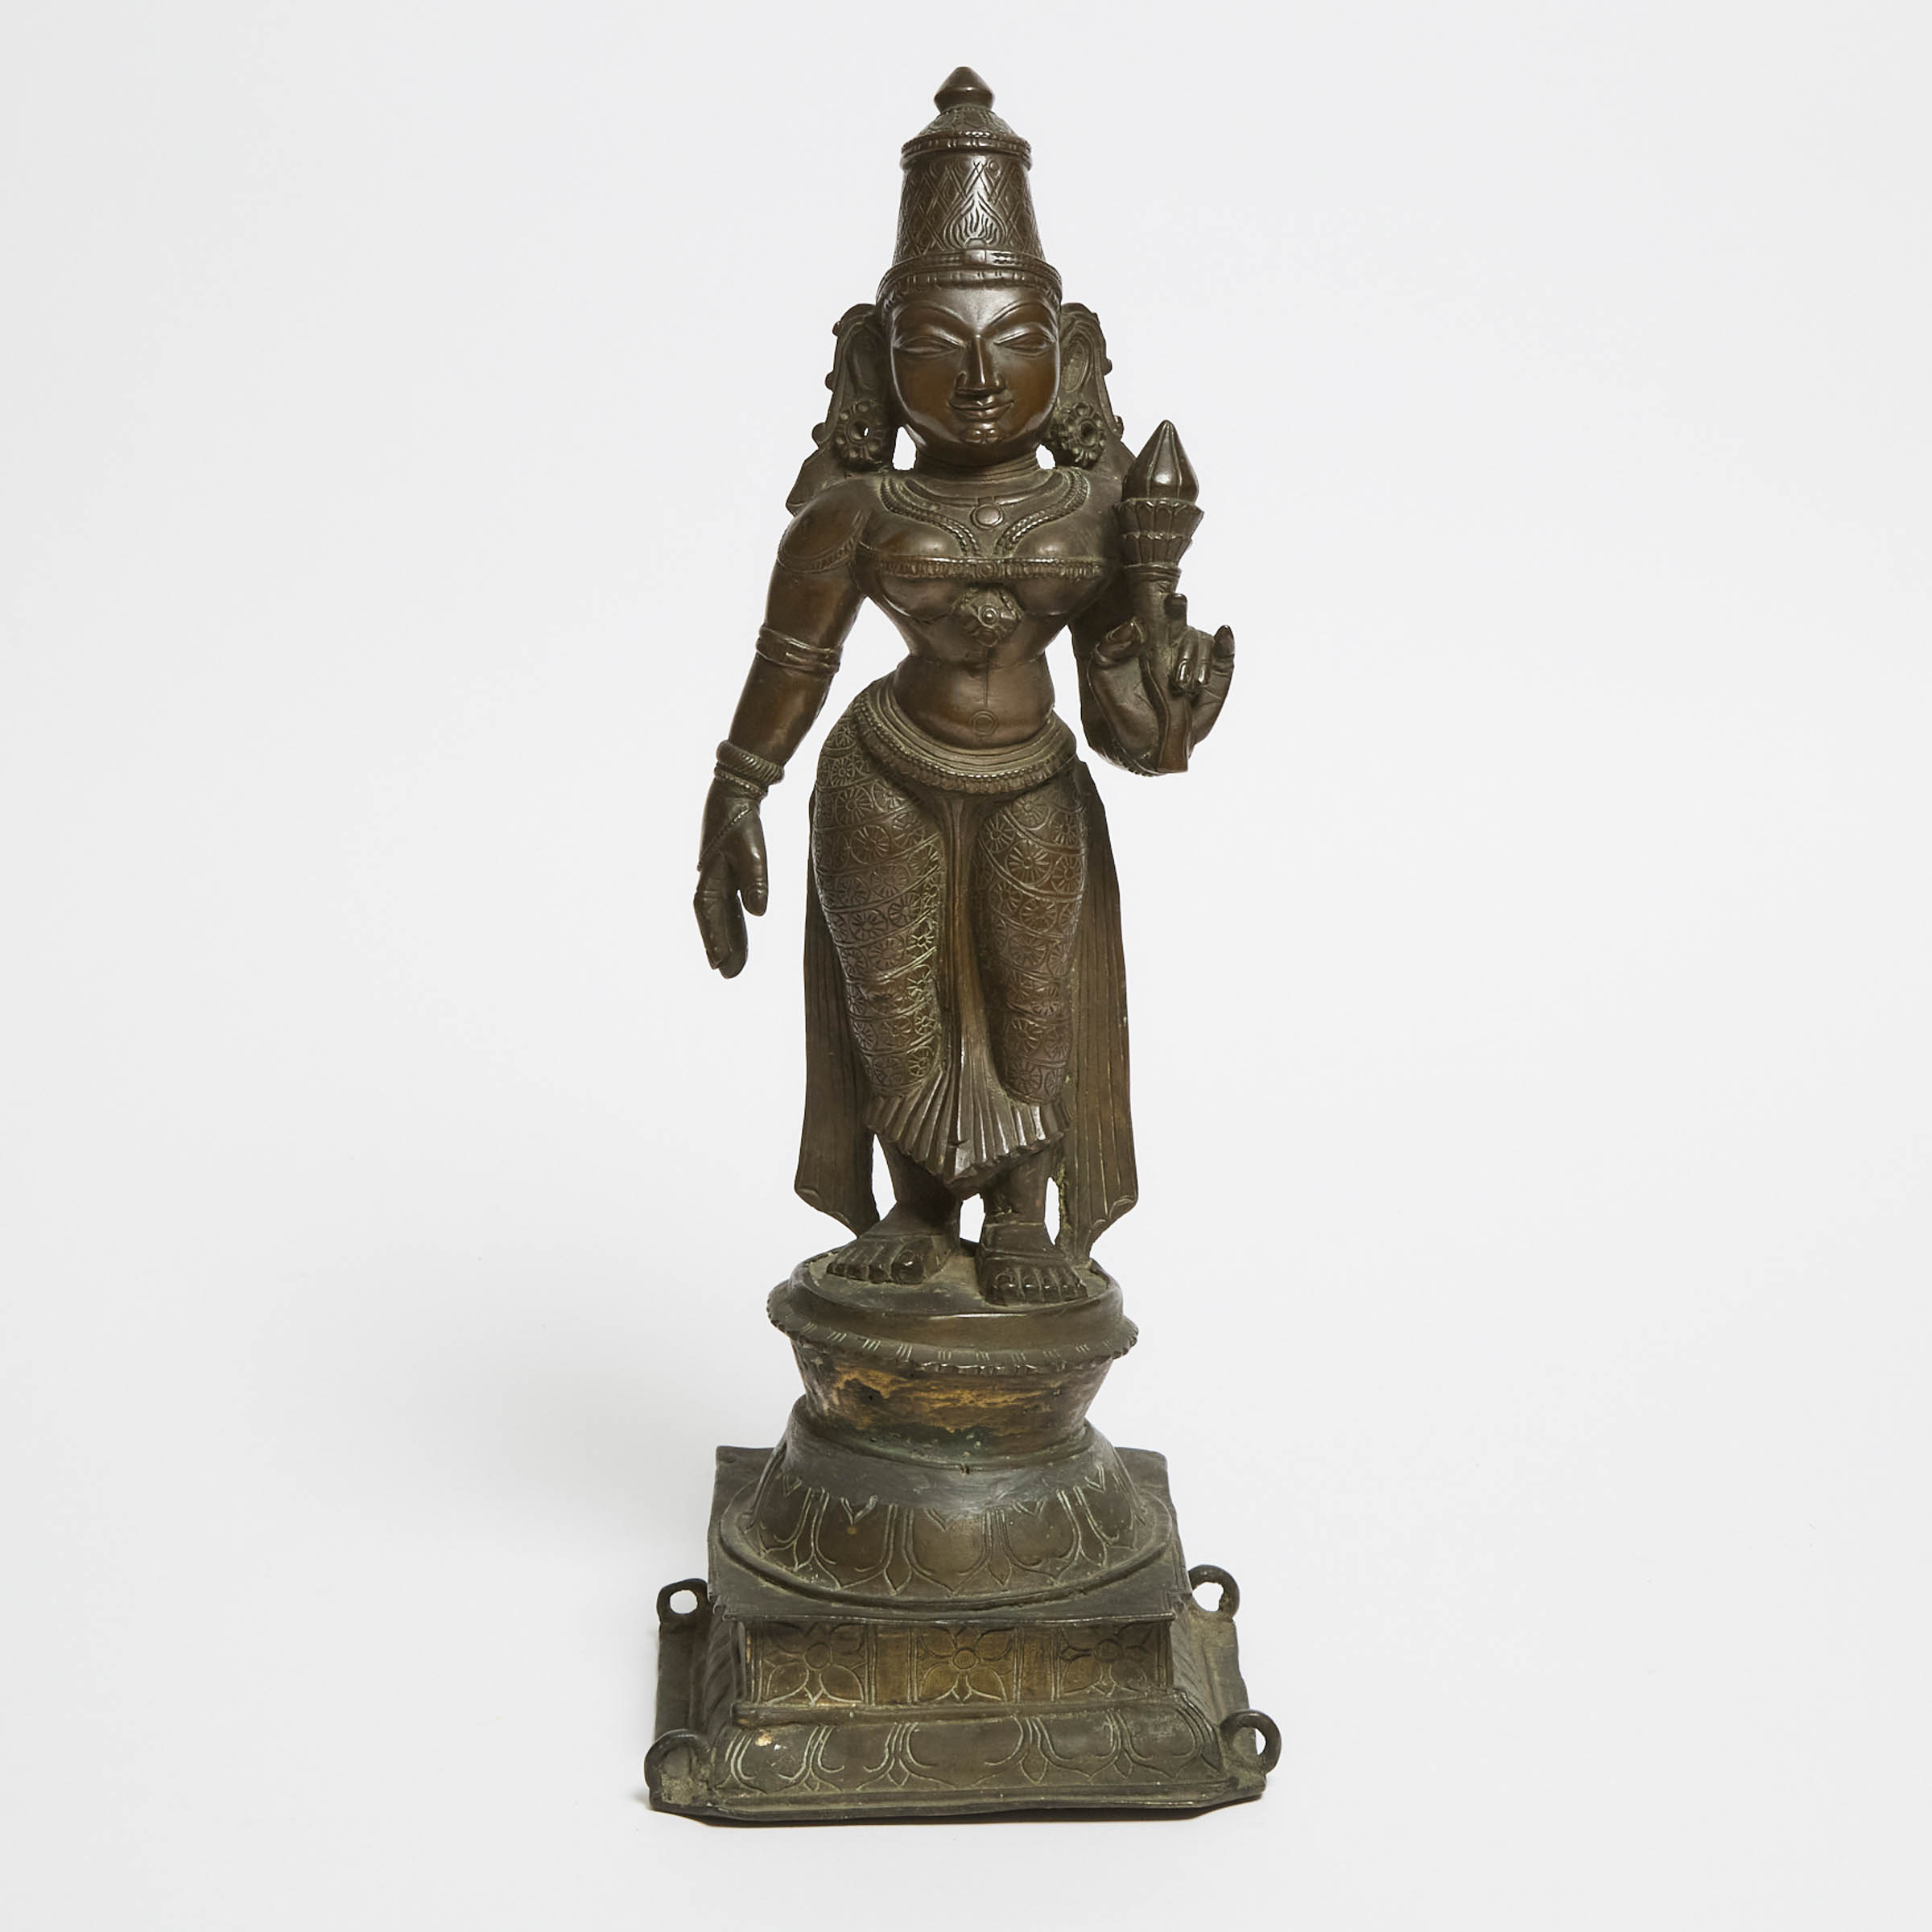 A Large Bronze Standing Figure of Parvati